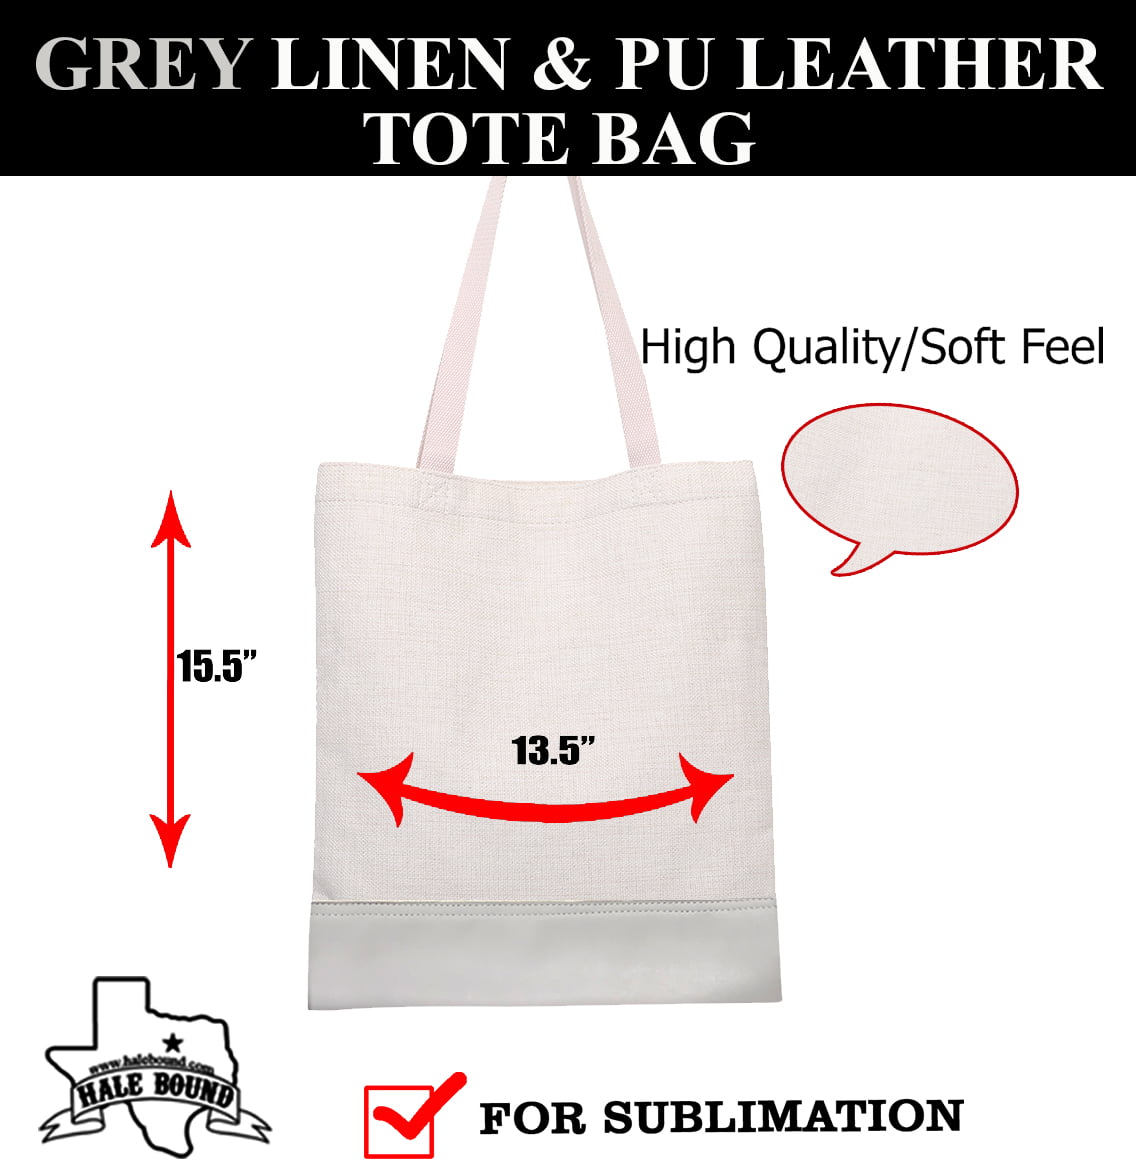 PU LEATHER & LINEN TOTE BAG - Hale Bound